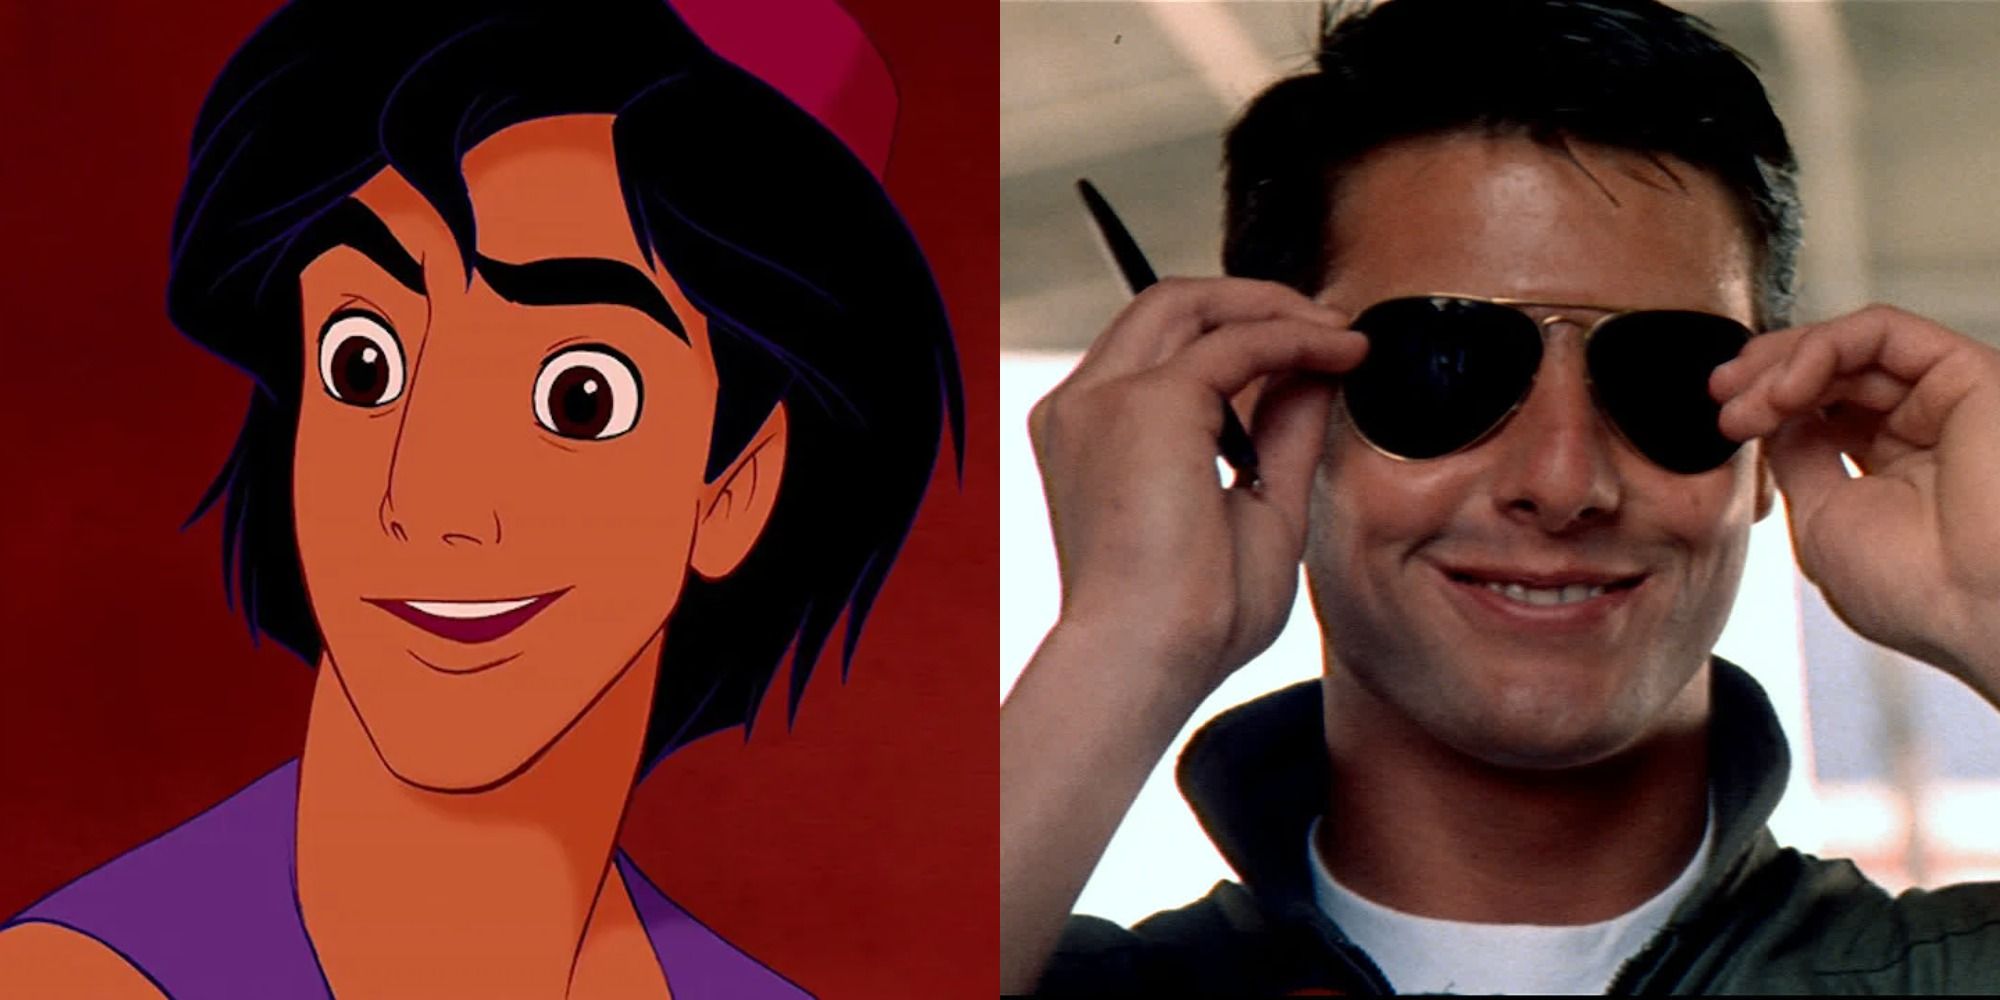 Side by side image of Aladdin and Tom Cruise in Top Gun.